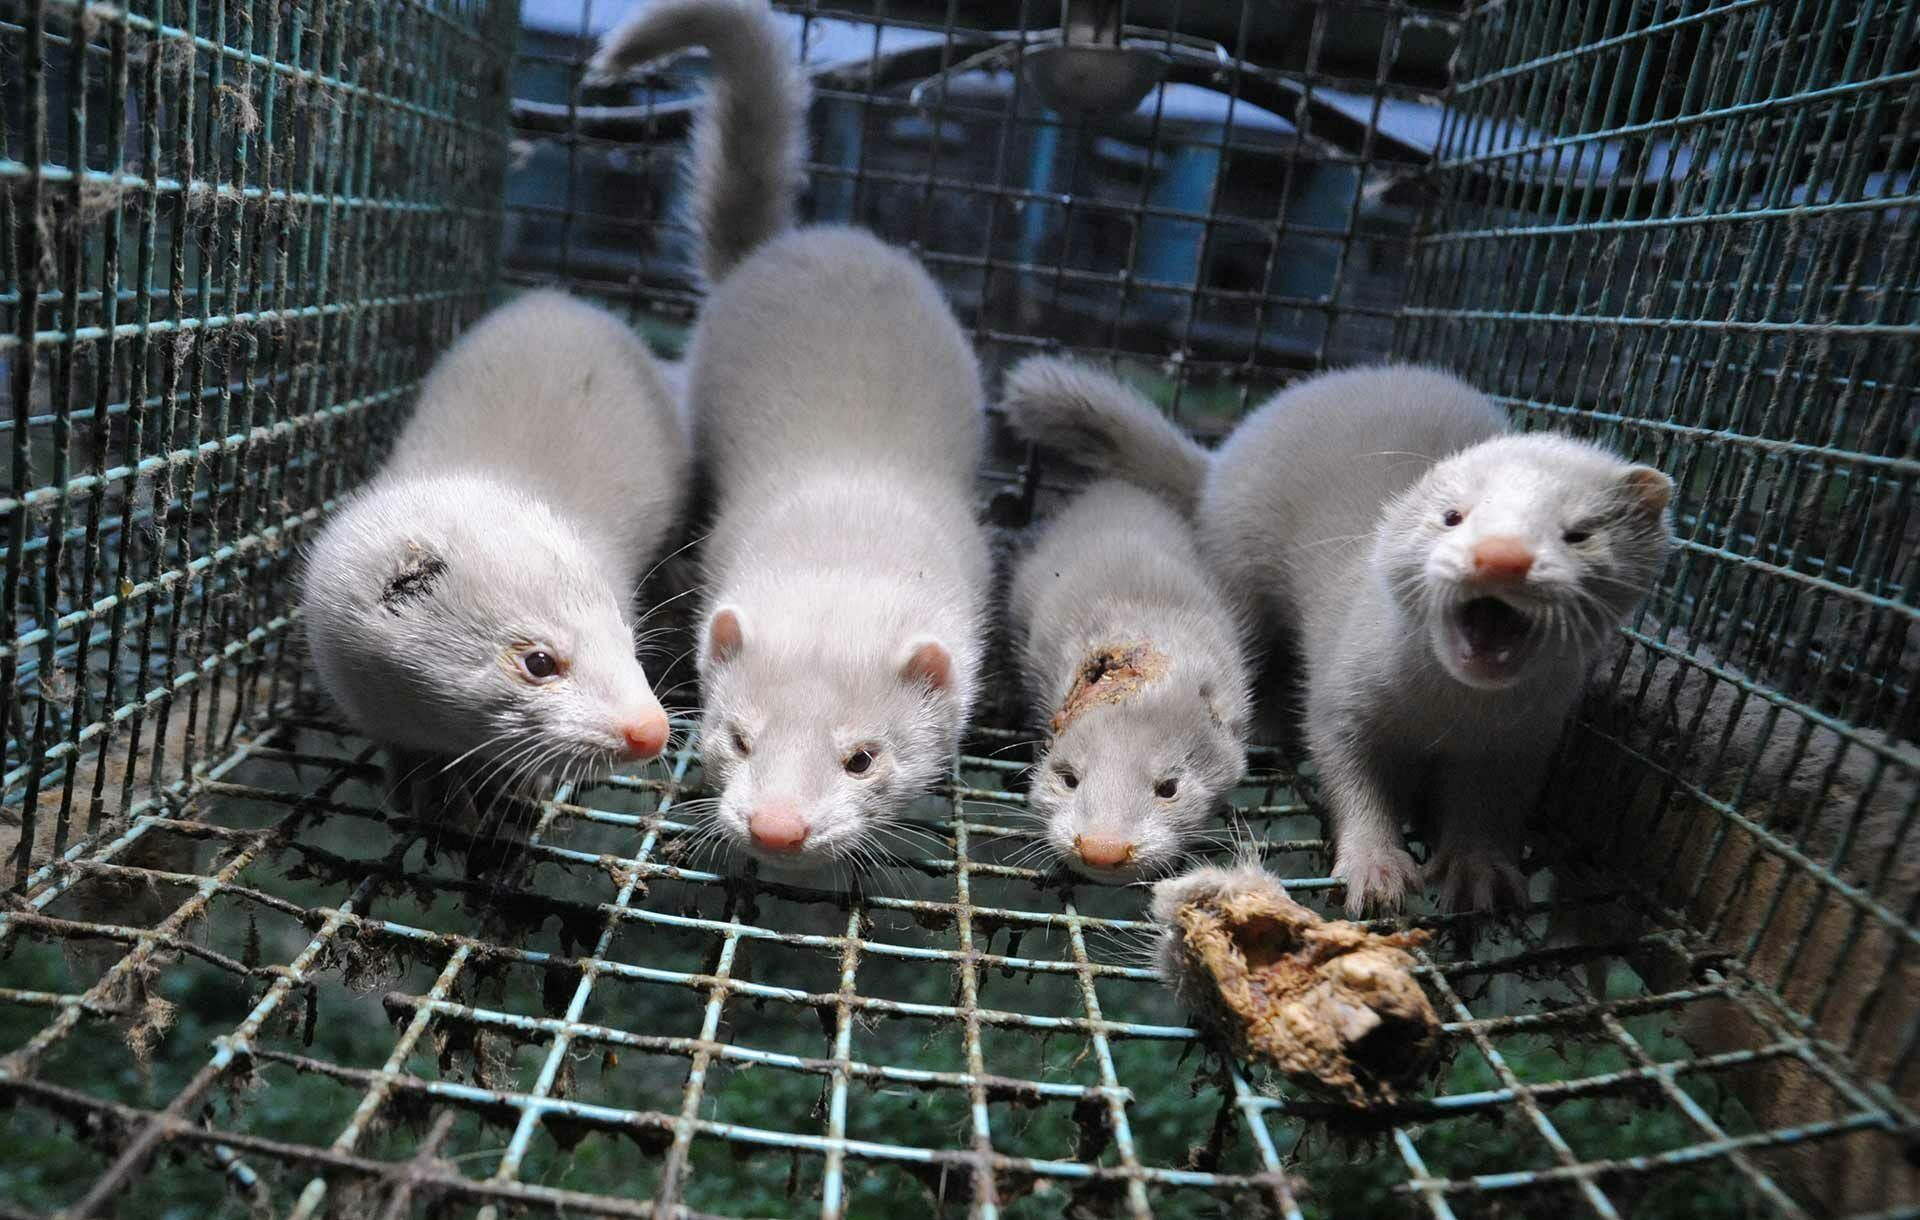 "Savagely important problem": do minks suffer from coronavirus on Russian farms?